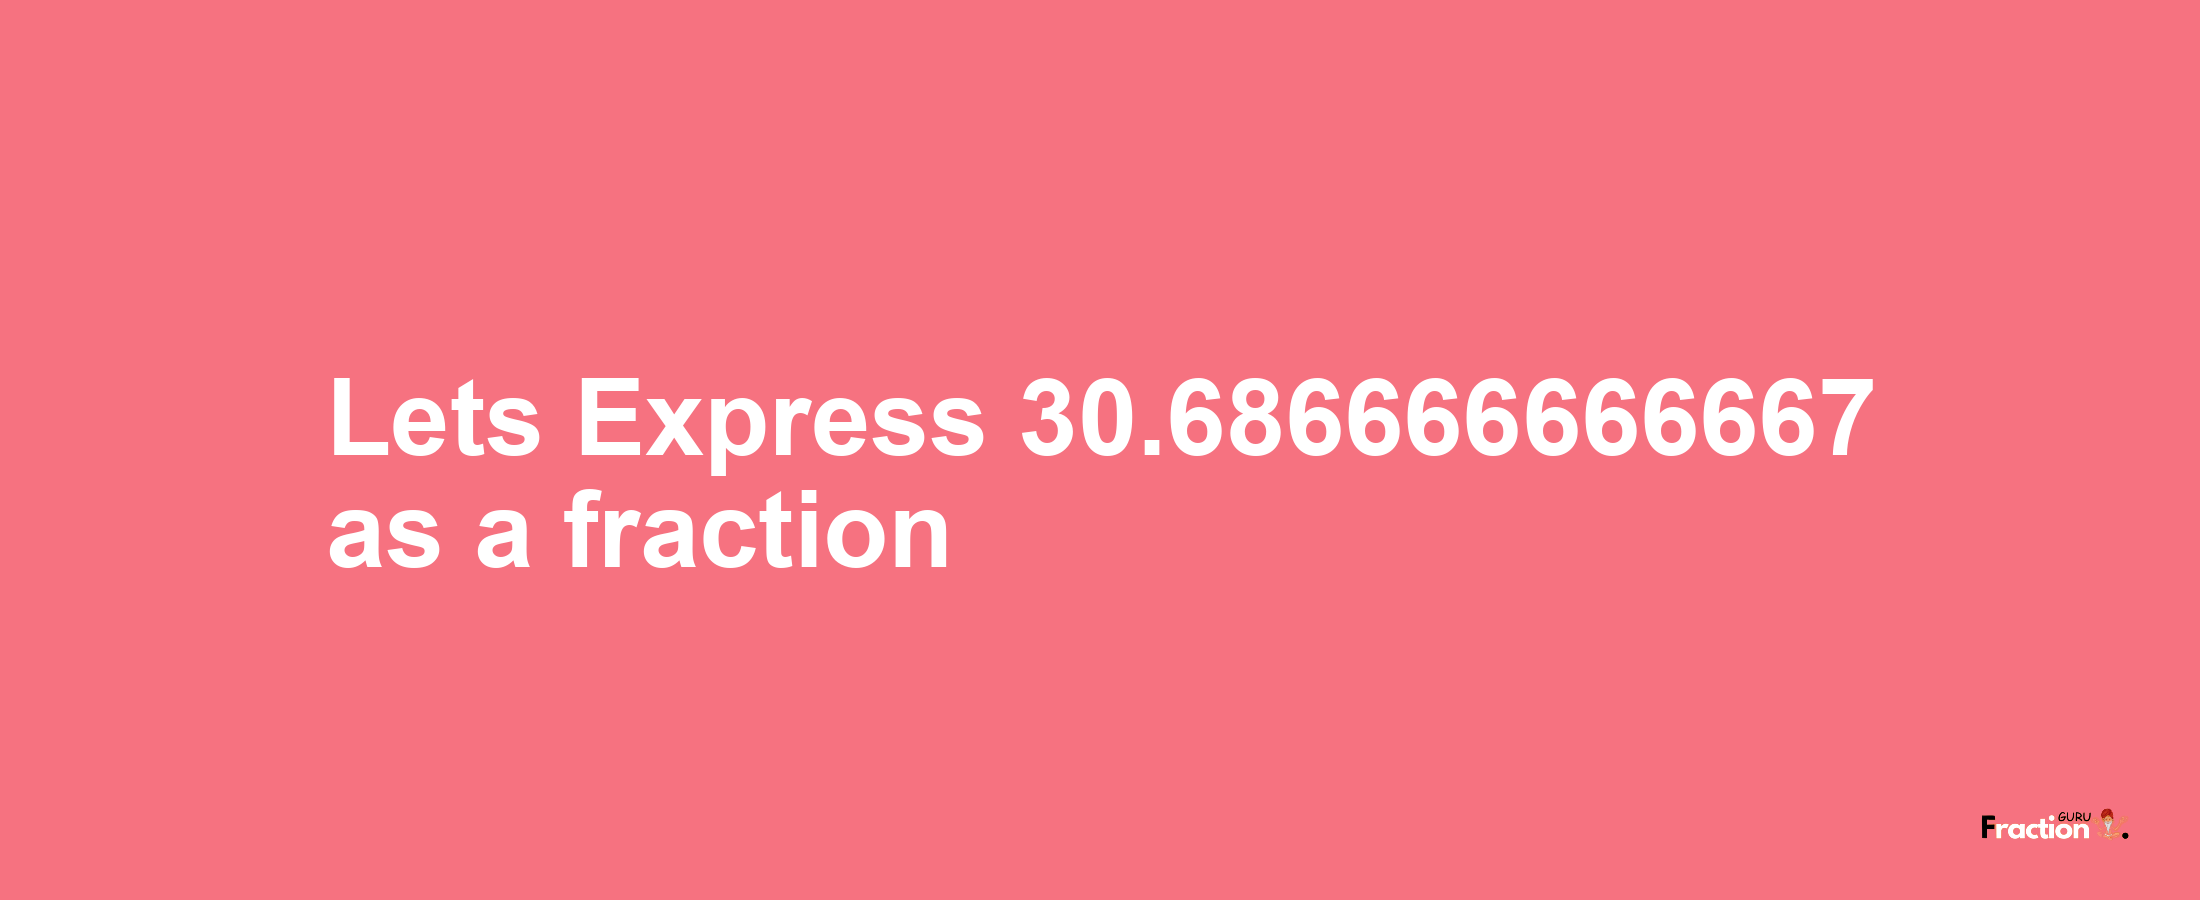 Lets Express 30.686666666667 as afraction